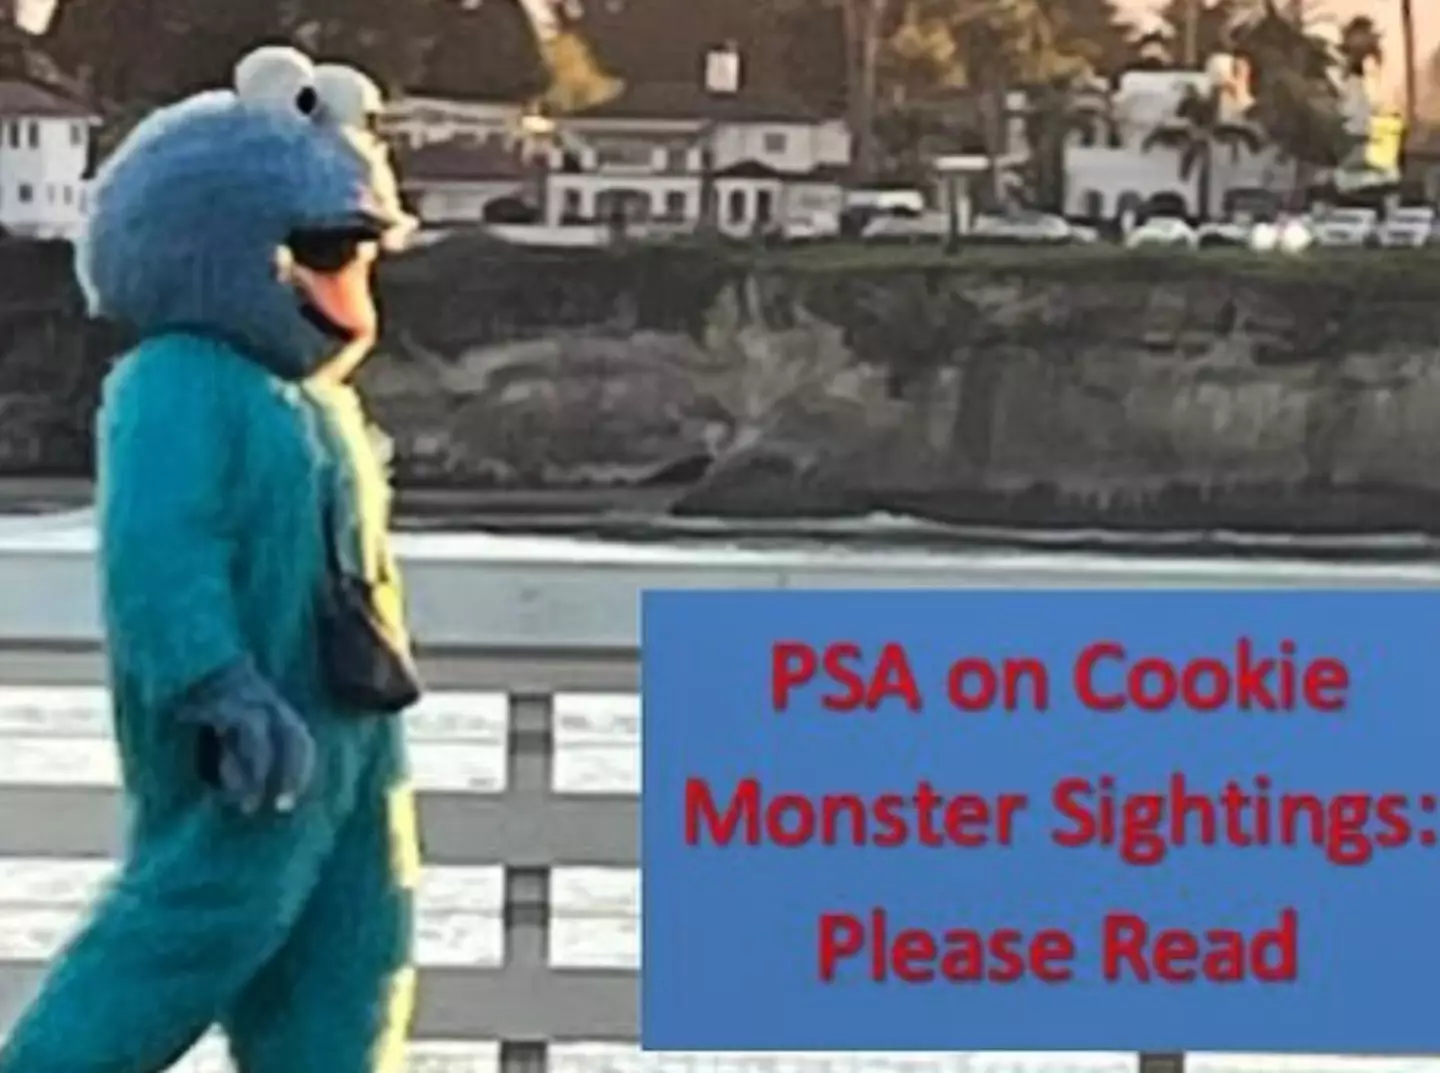 People have been warned to stay away from the Adam Sandler Cookie Monster.